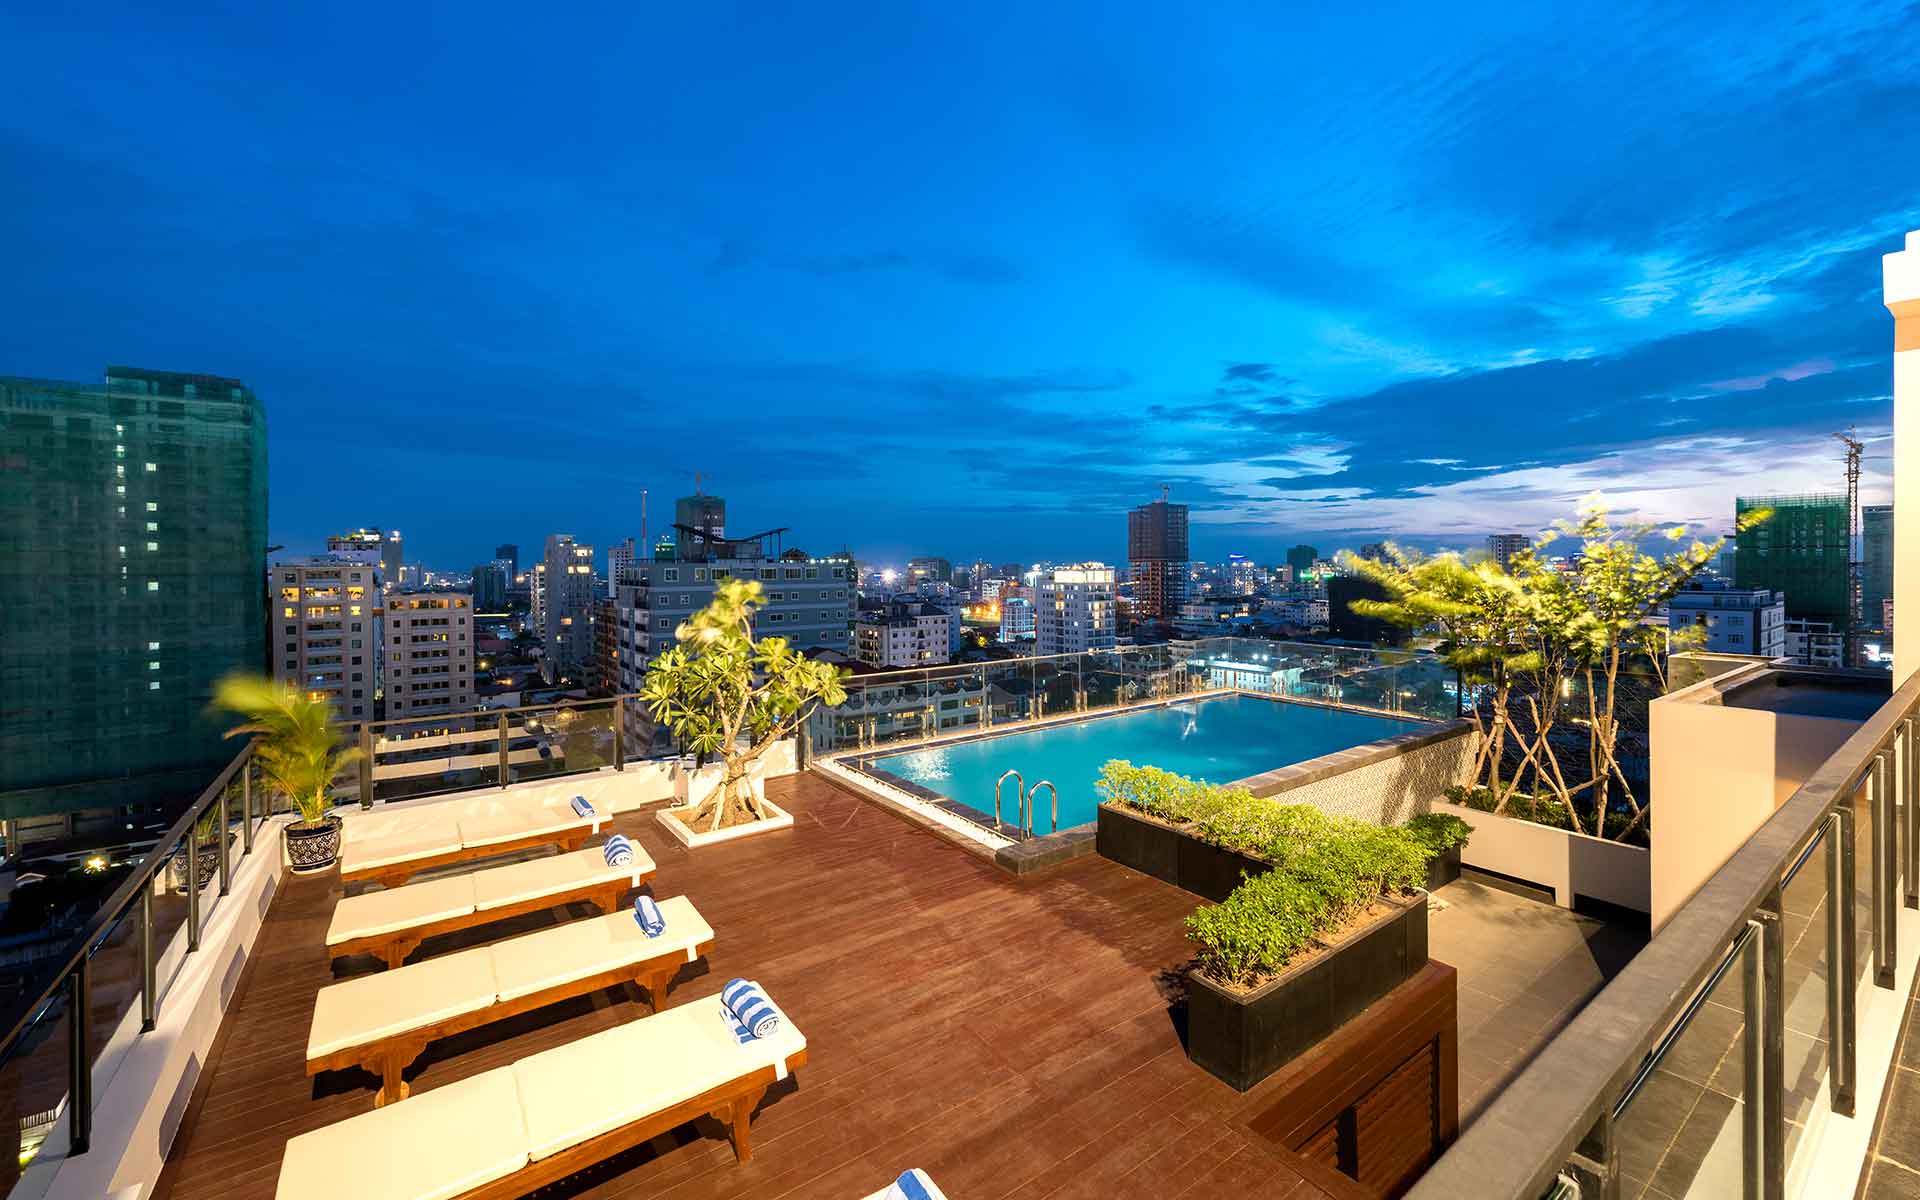 the swimming pool of the 1-bedroom duplex loft serviced apartment for rent in BKK1 in Phnom Penh Cambodia